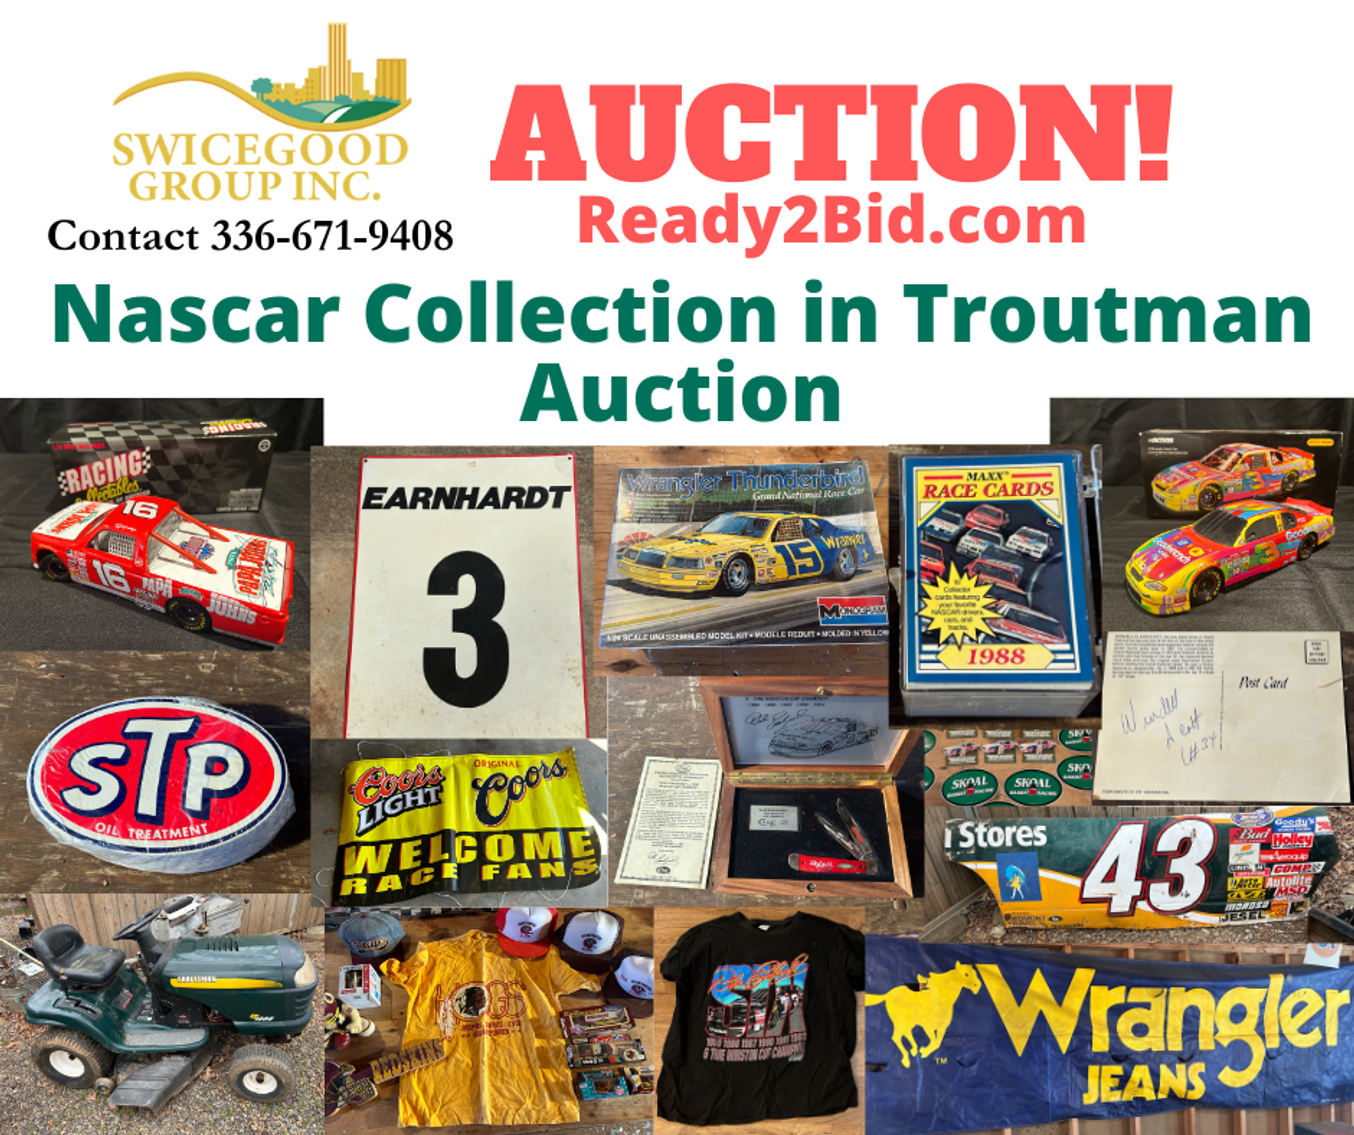 Nascar Collection in Troutman Auction